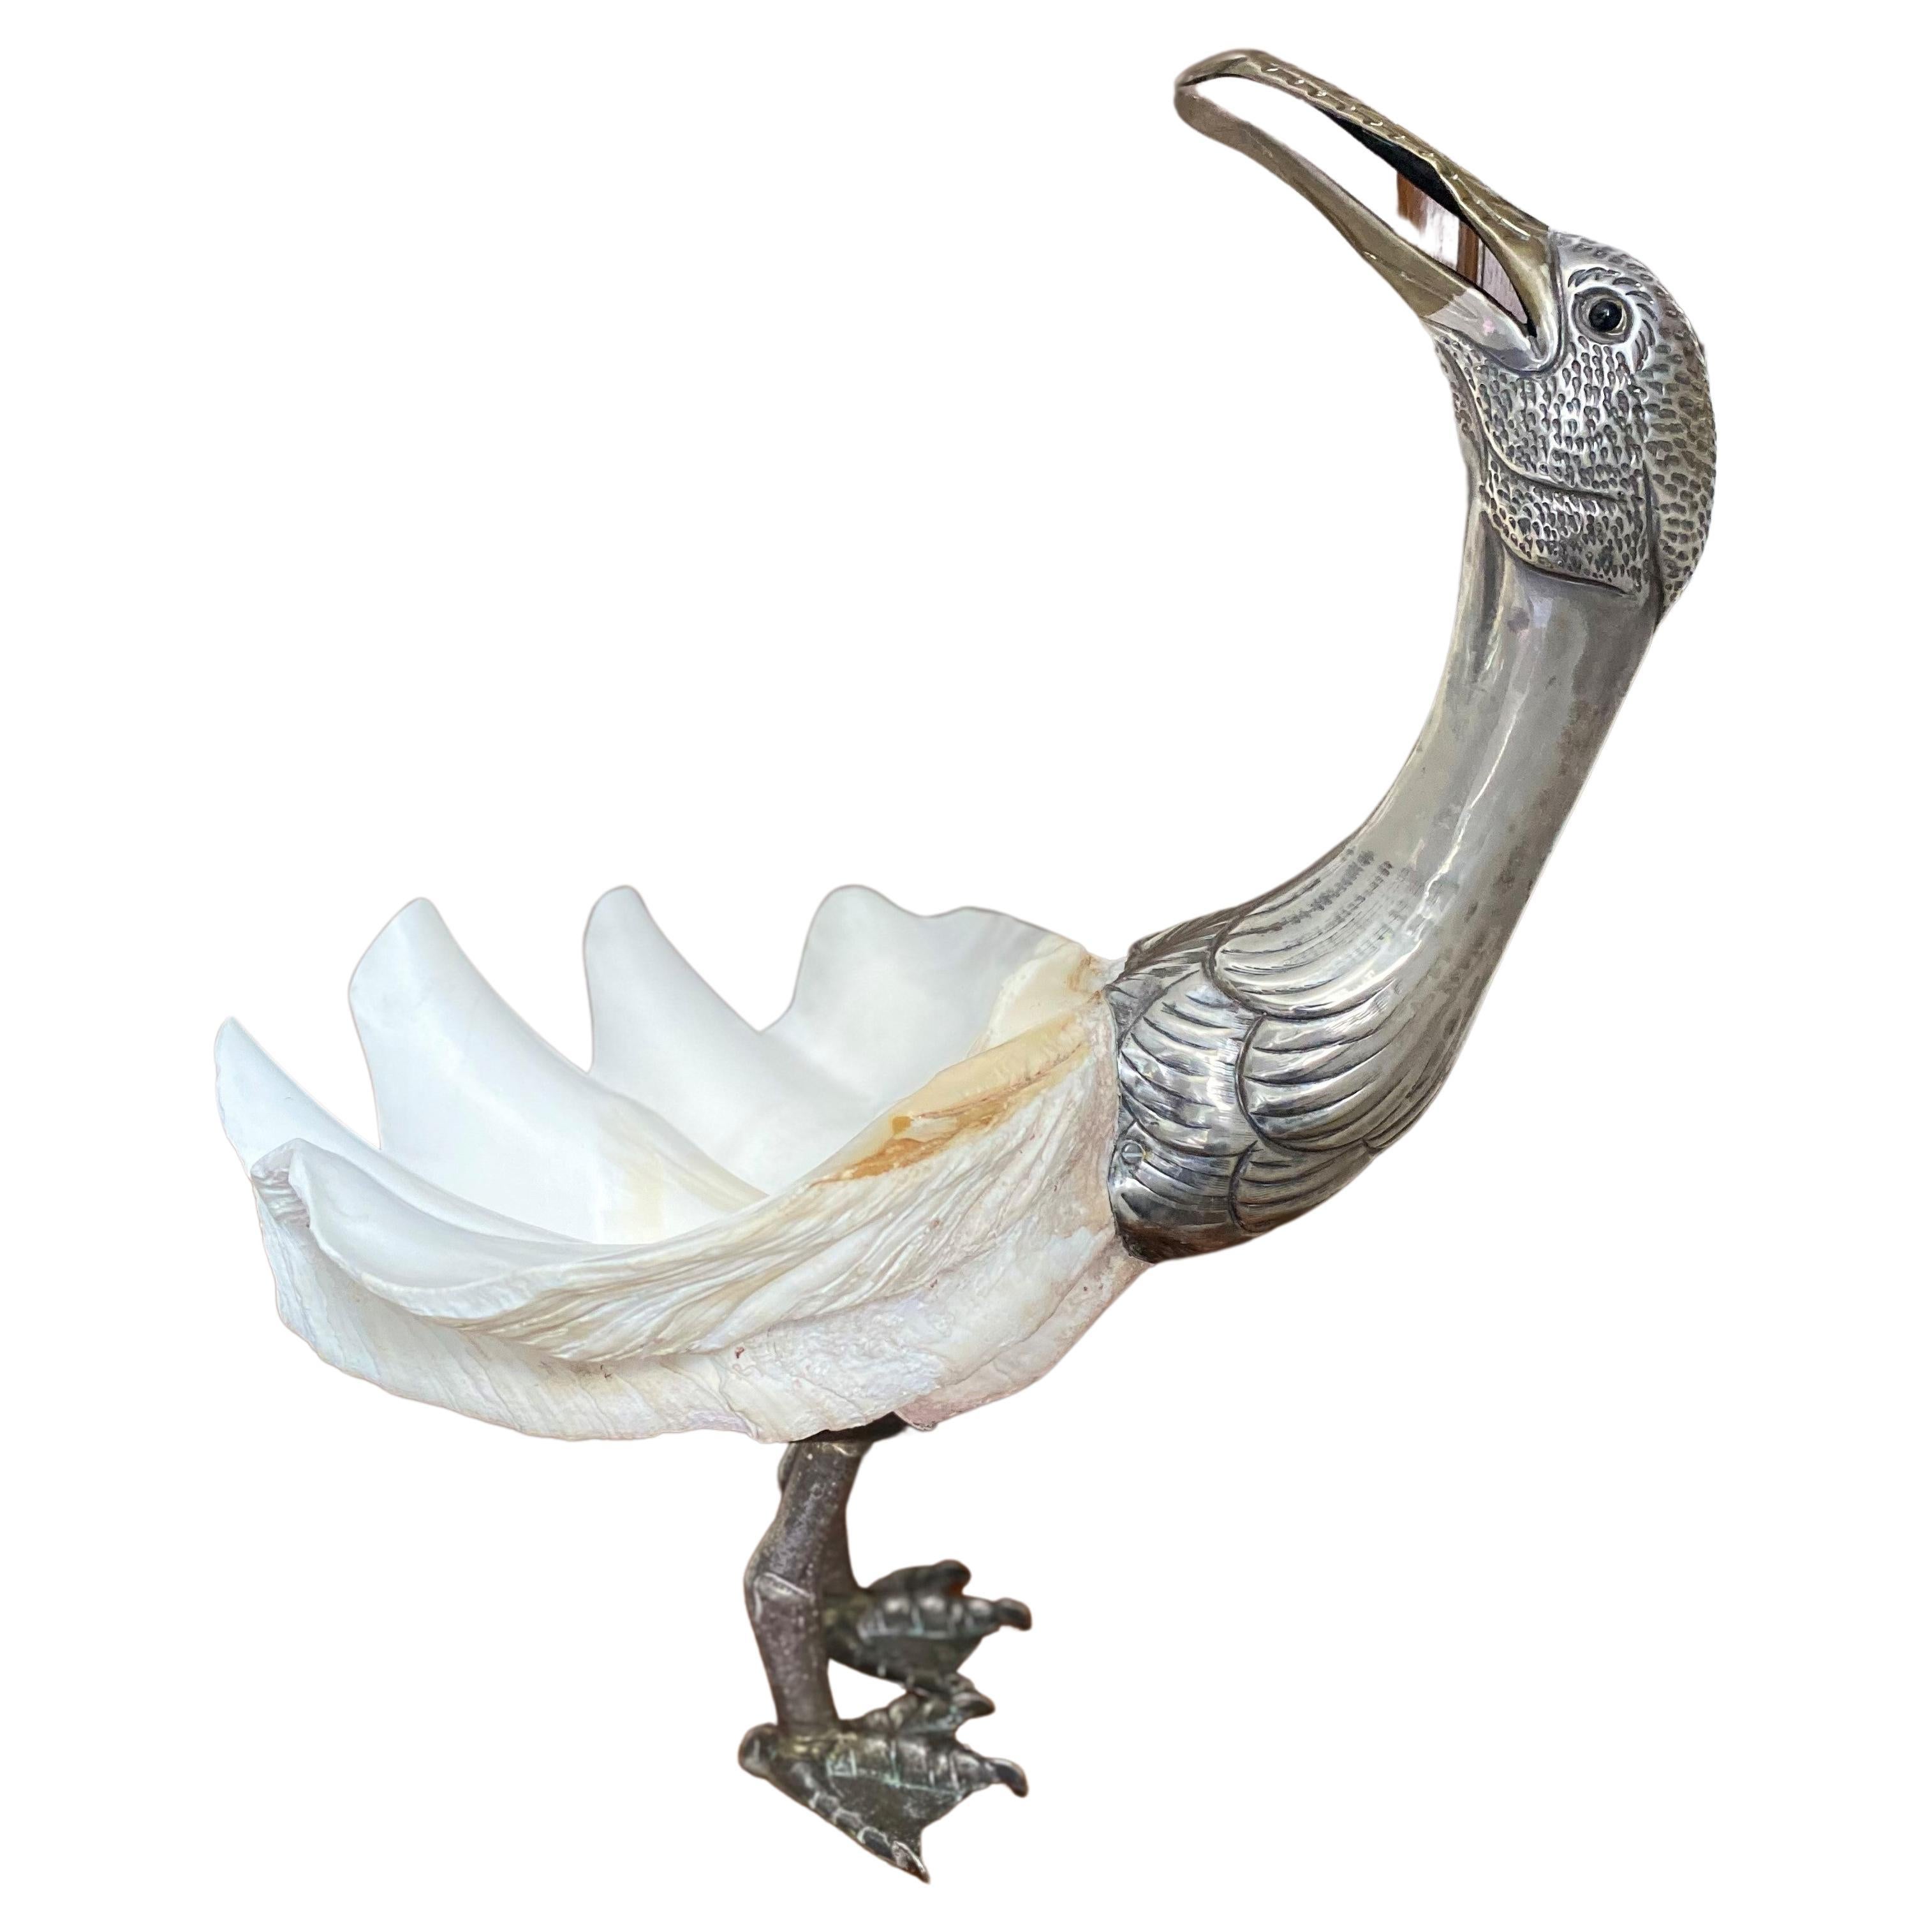 Midcentury Bird Sculpture by Gabriella Binazzi with Giant Clam Shell, Italian